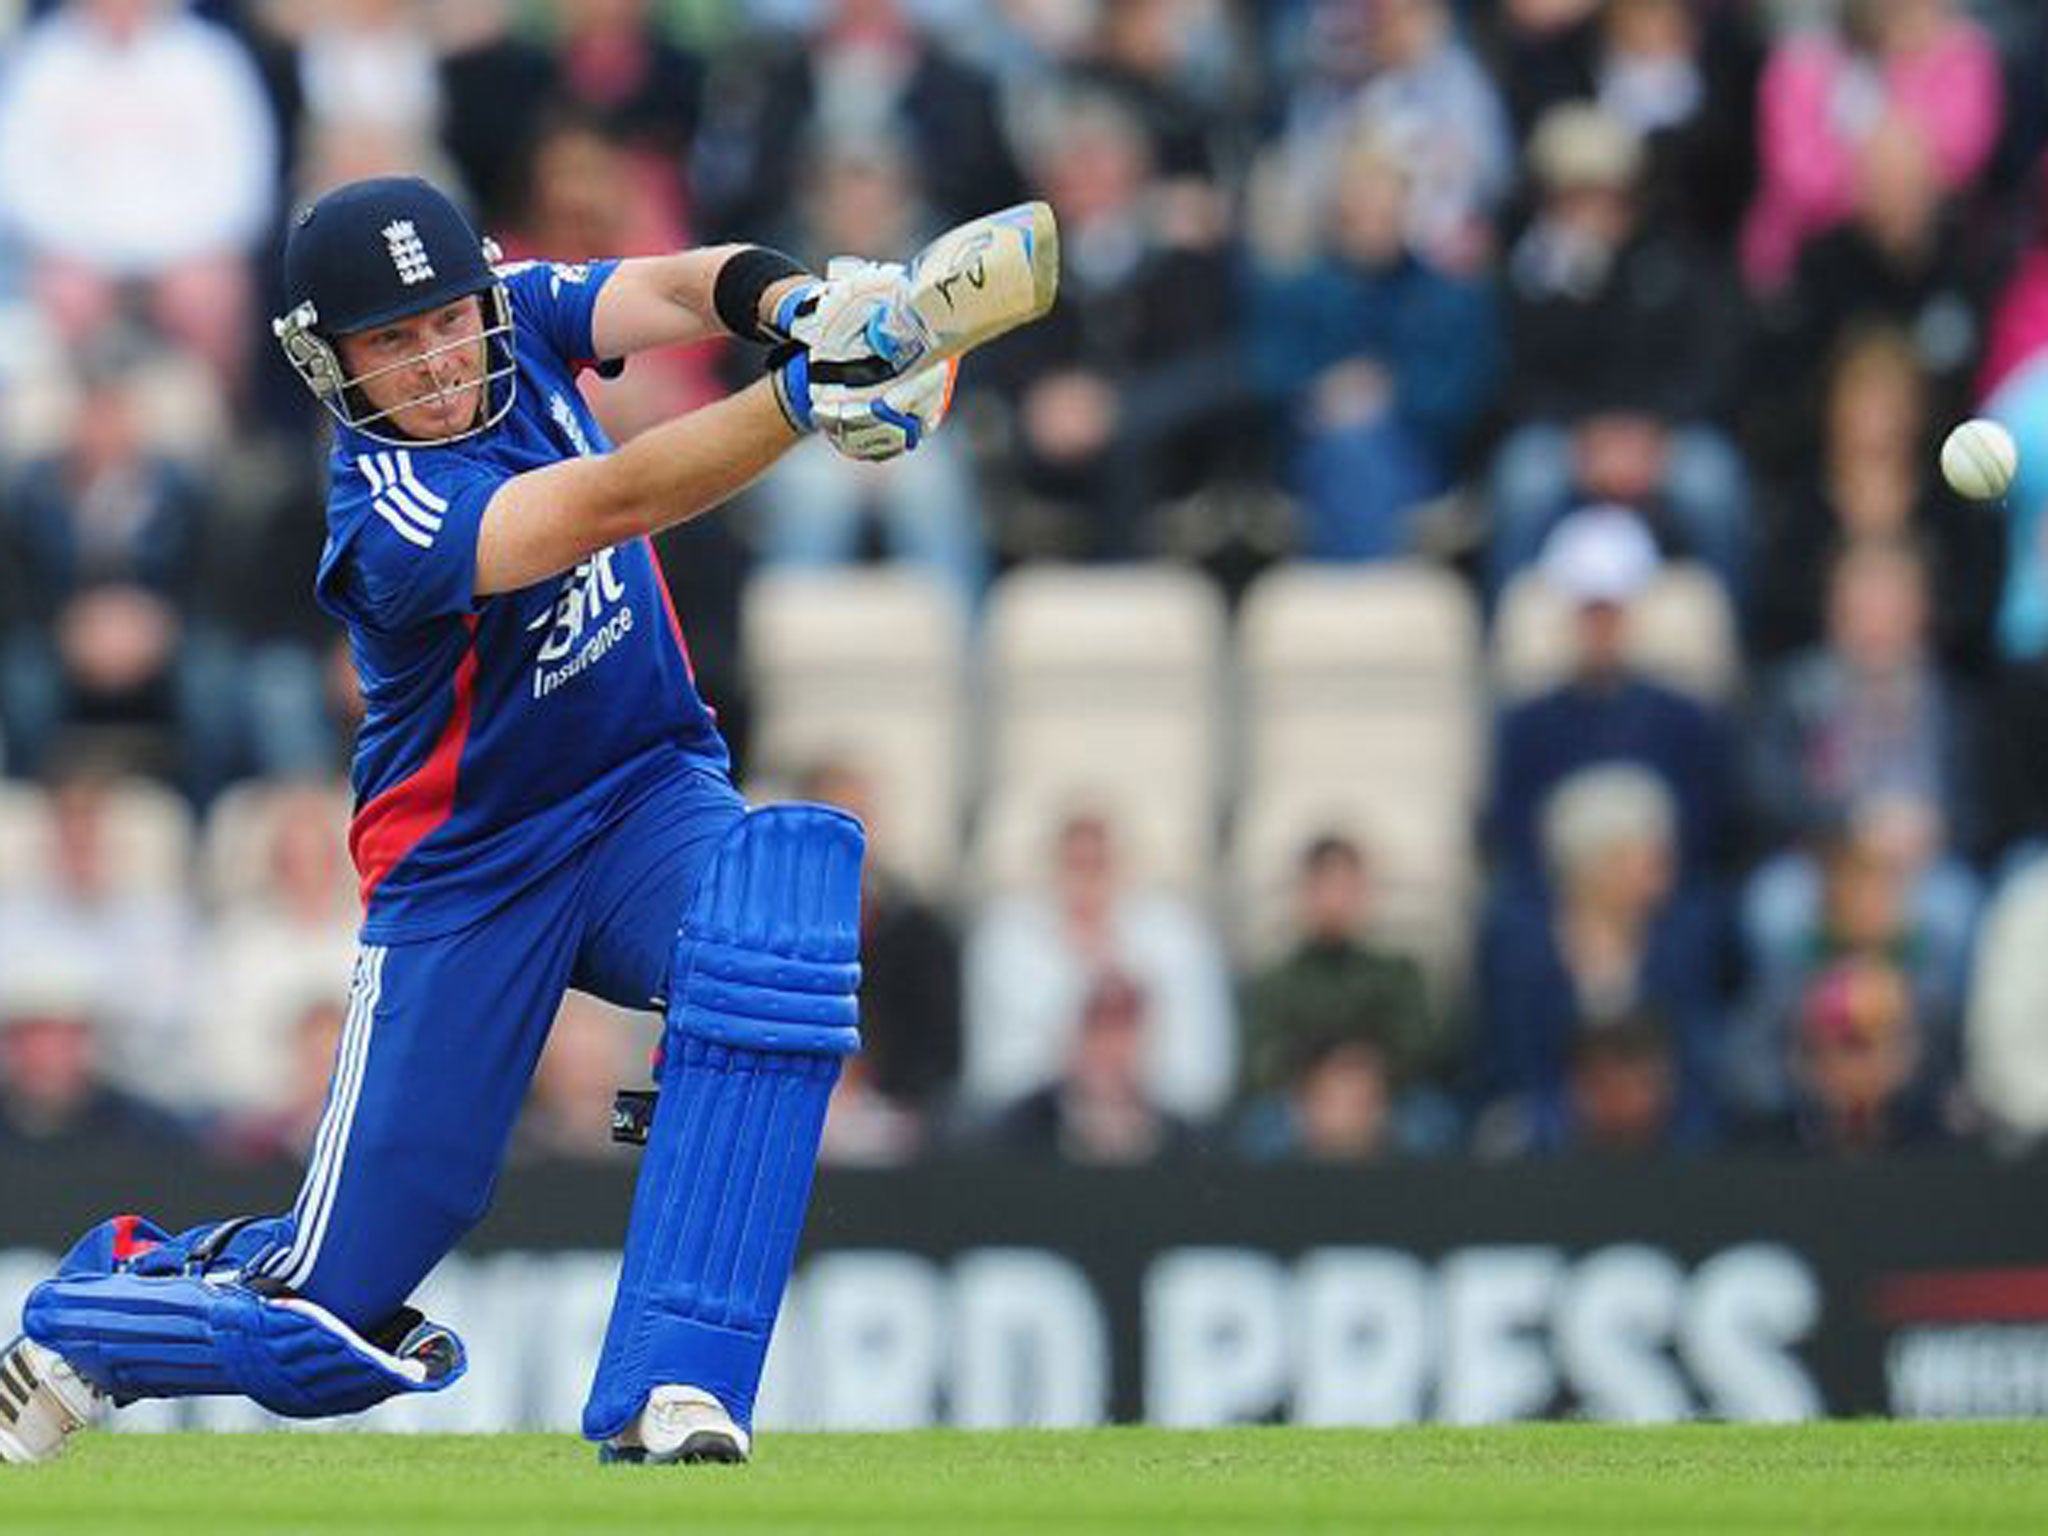 Ian Bell was England’s only batsman to post a significant score in the Delhi warm-up